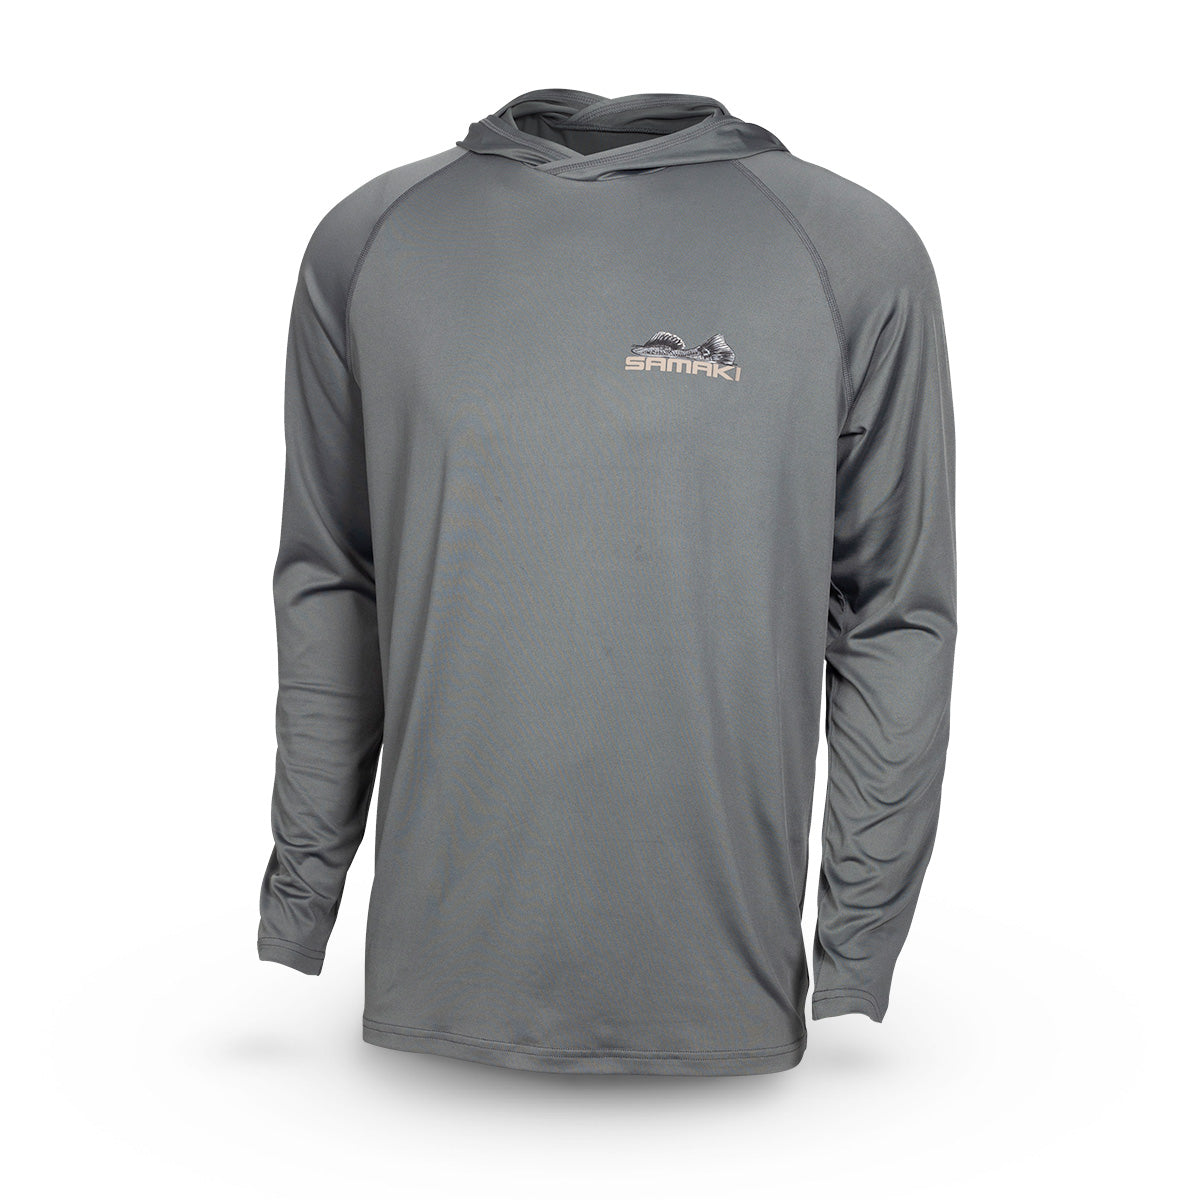 Tailing Hooded Performance Shirt